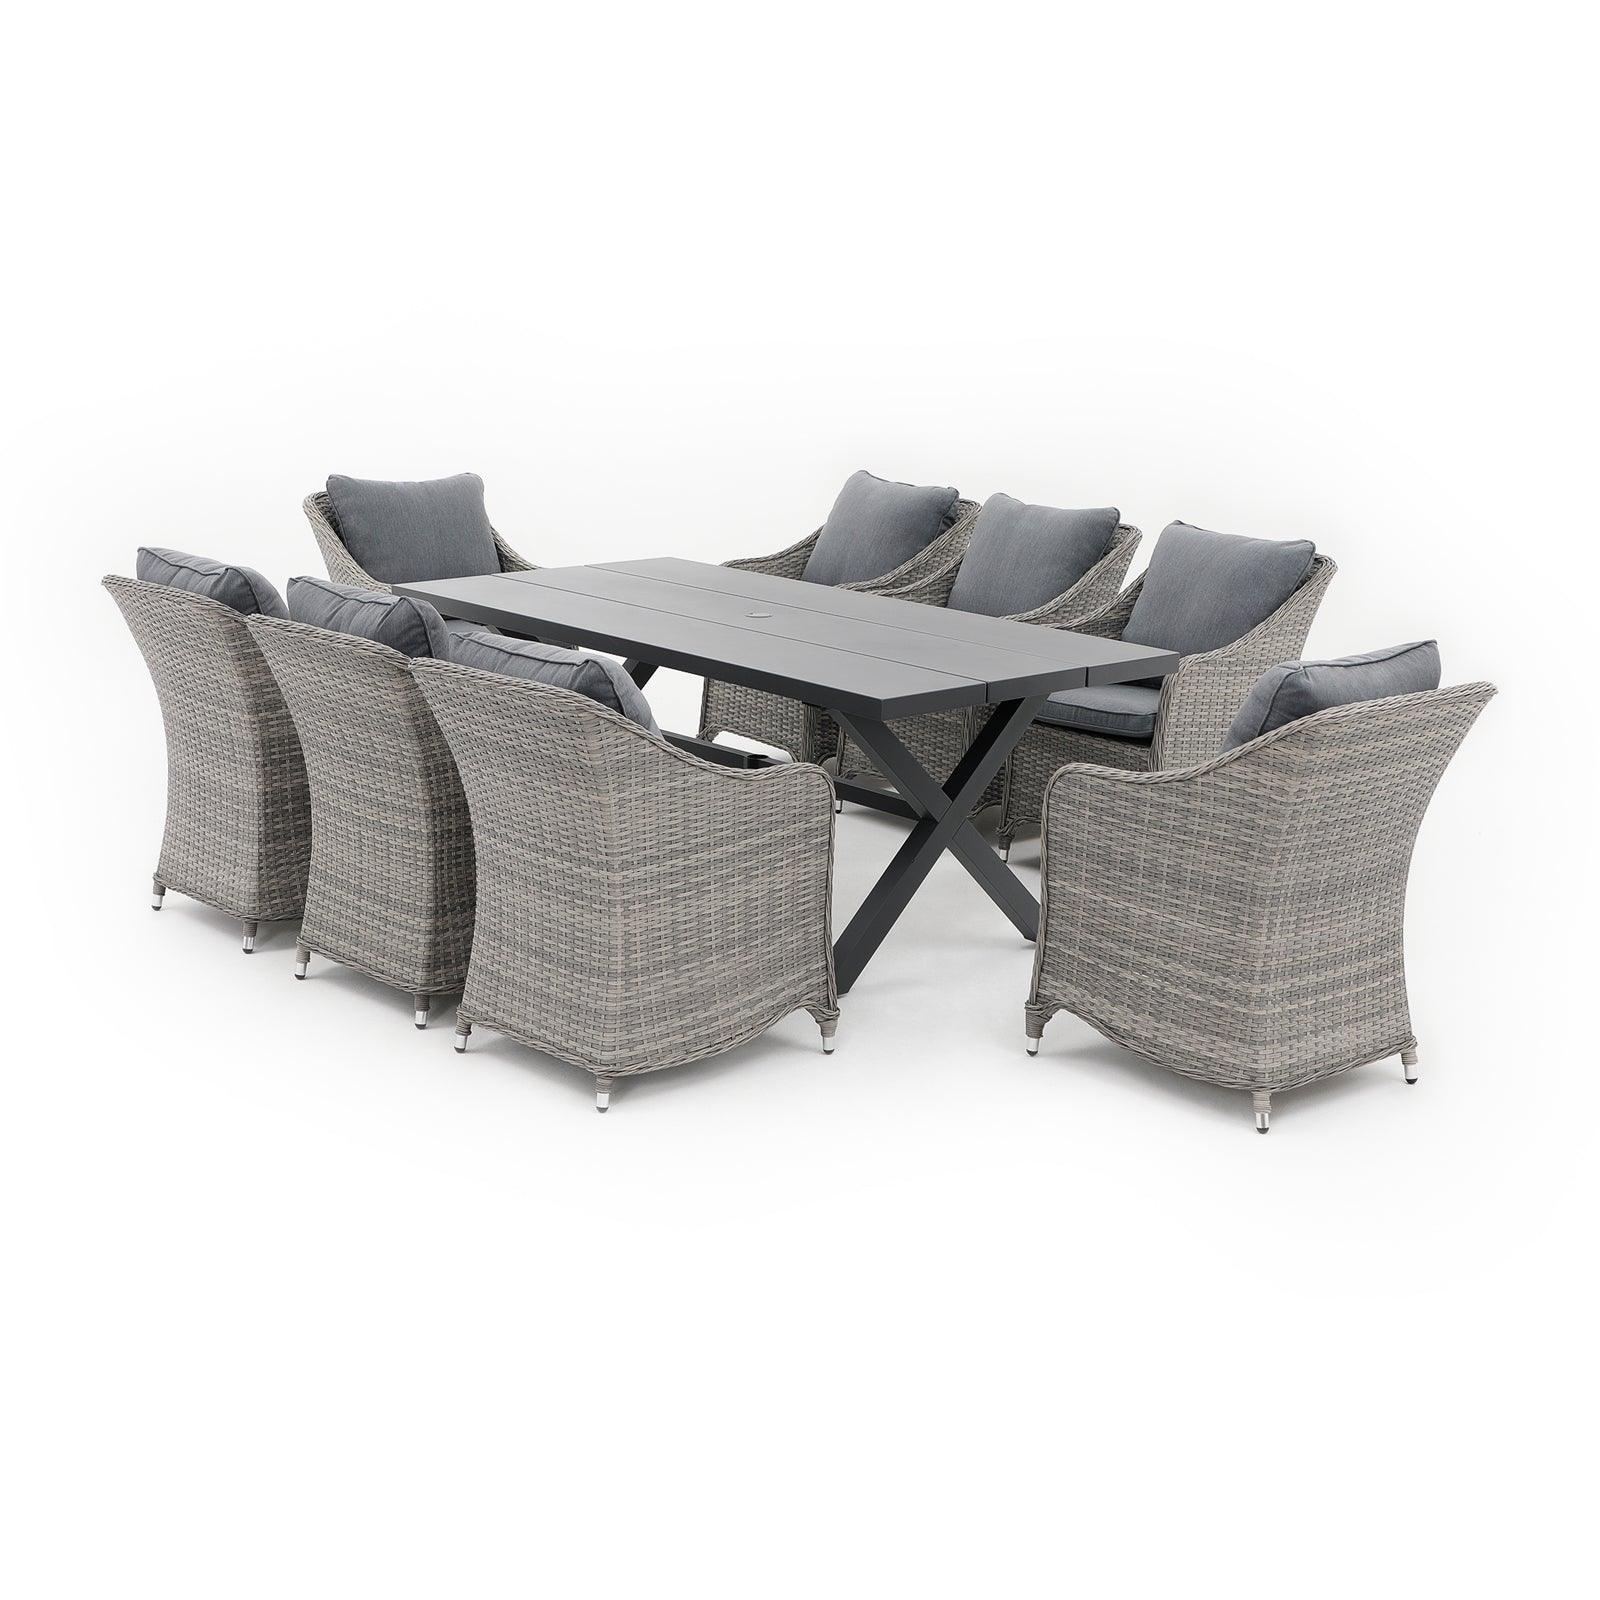 Irati grey wicker outdoor dining set with aluminum frame, grey cushions, 8 dining chairs , 1 X-shaped dining table - Jardina Furniture#color_Grey#Pieces_9-pc.